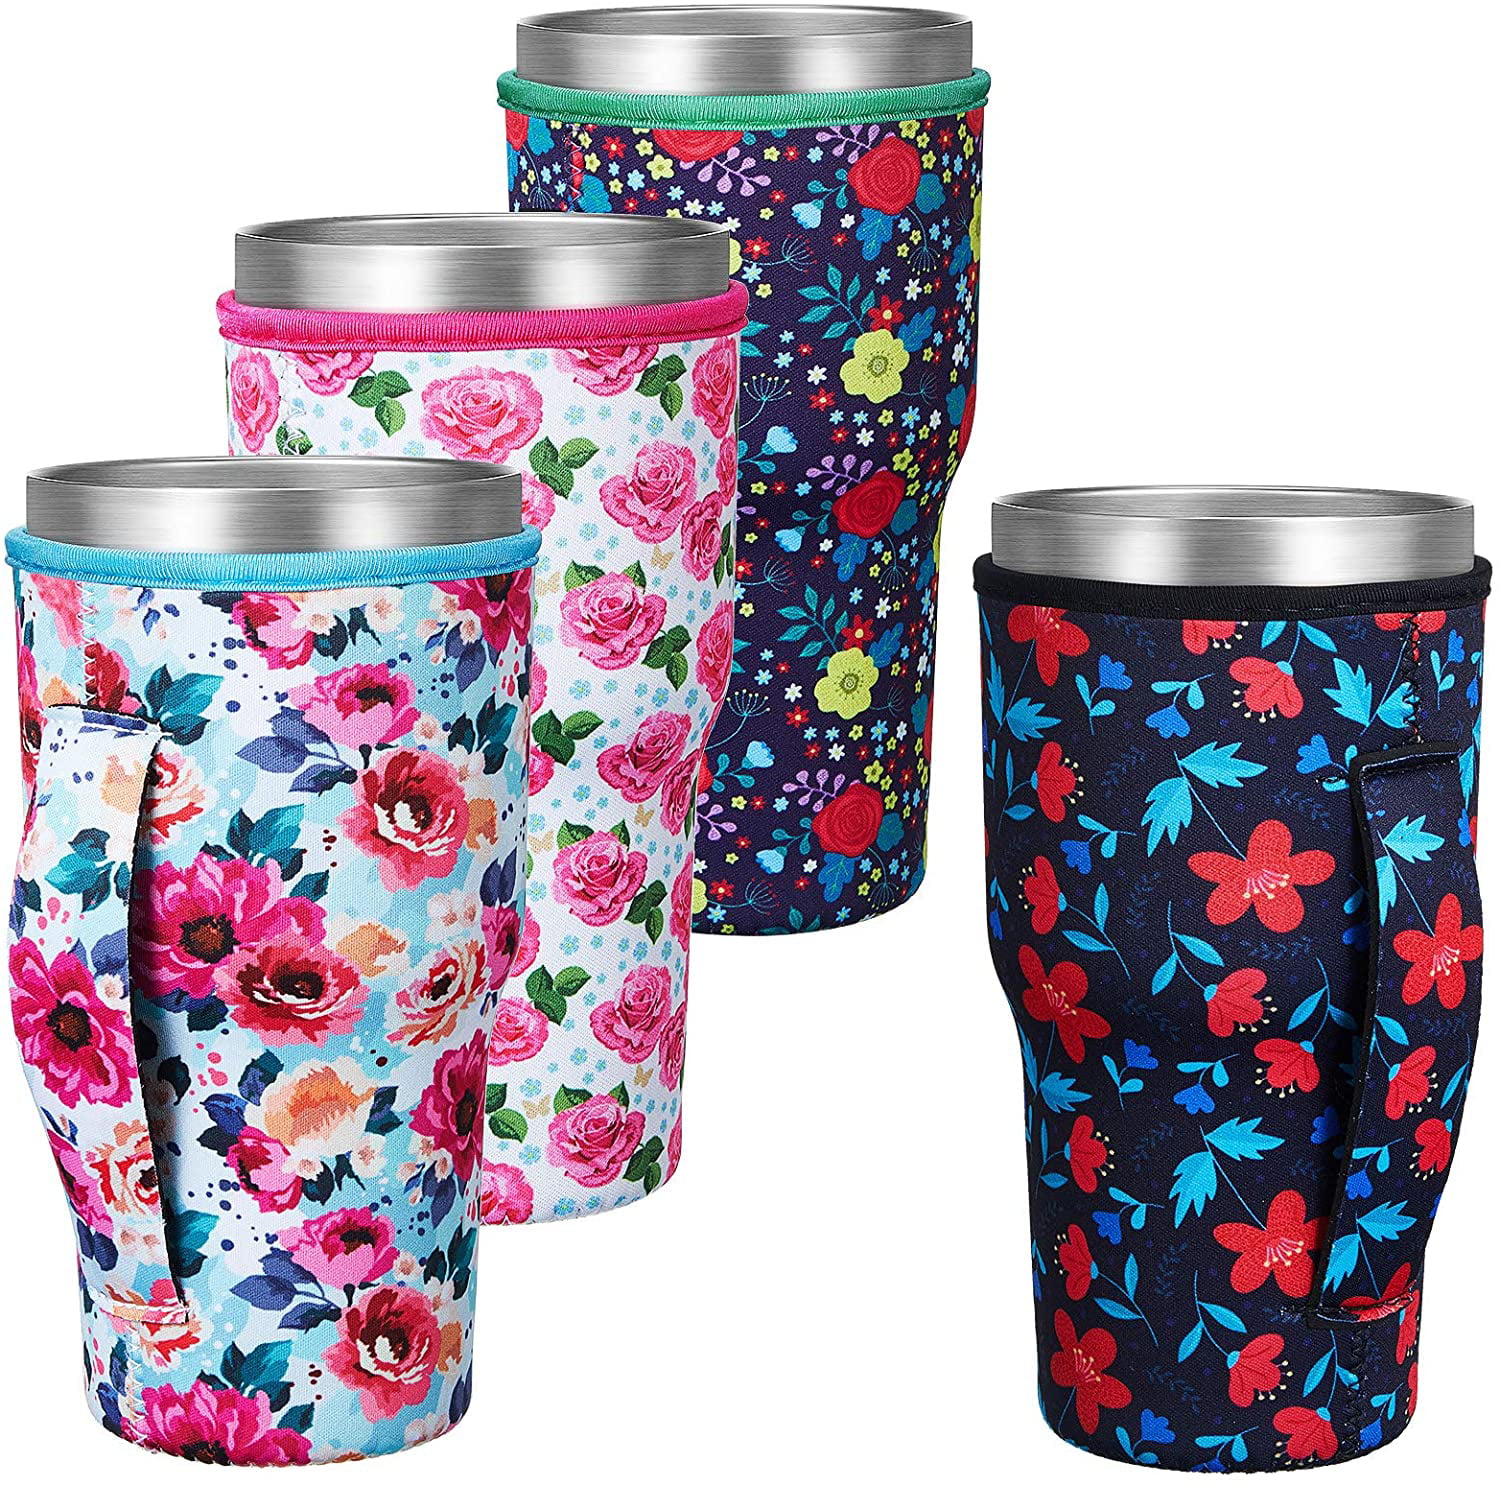 4 Designs 16 Ounces Juvale 48 Pack Vintage Floral Paper Insulated Coffee Cups with Lids 